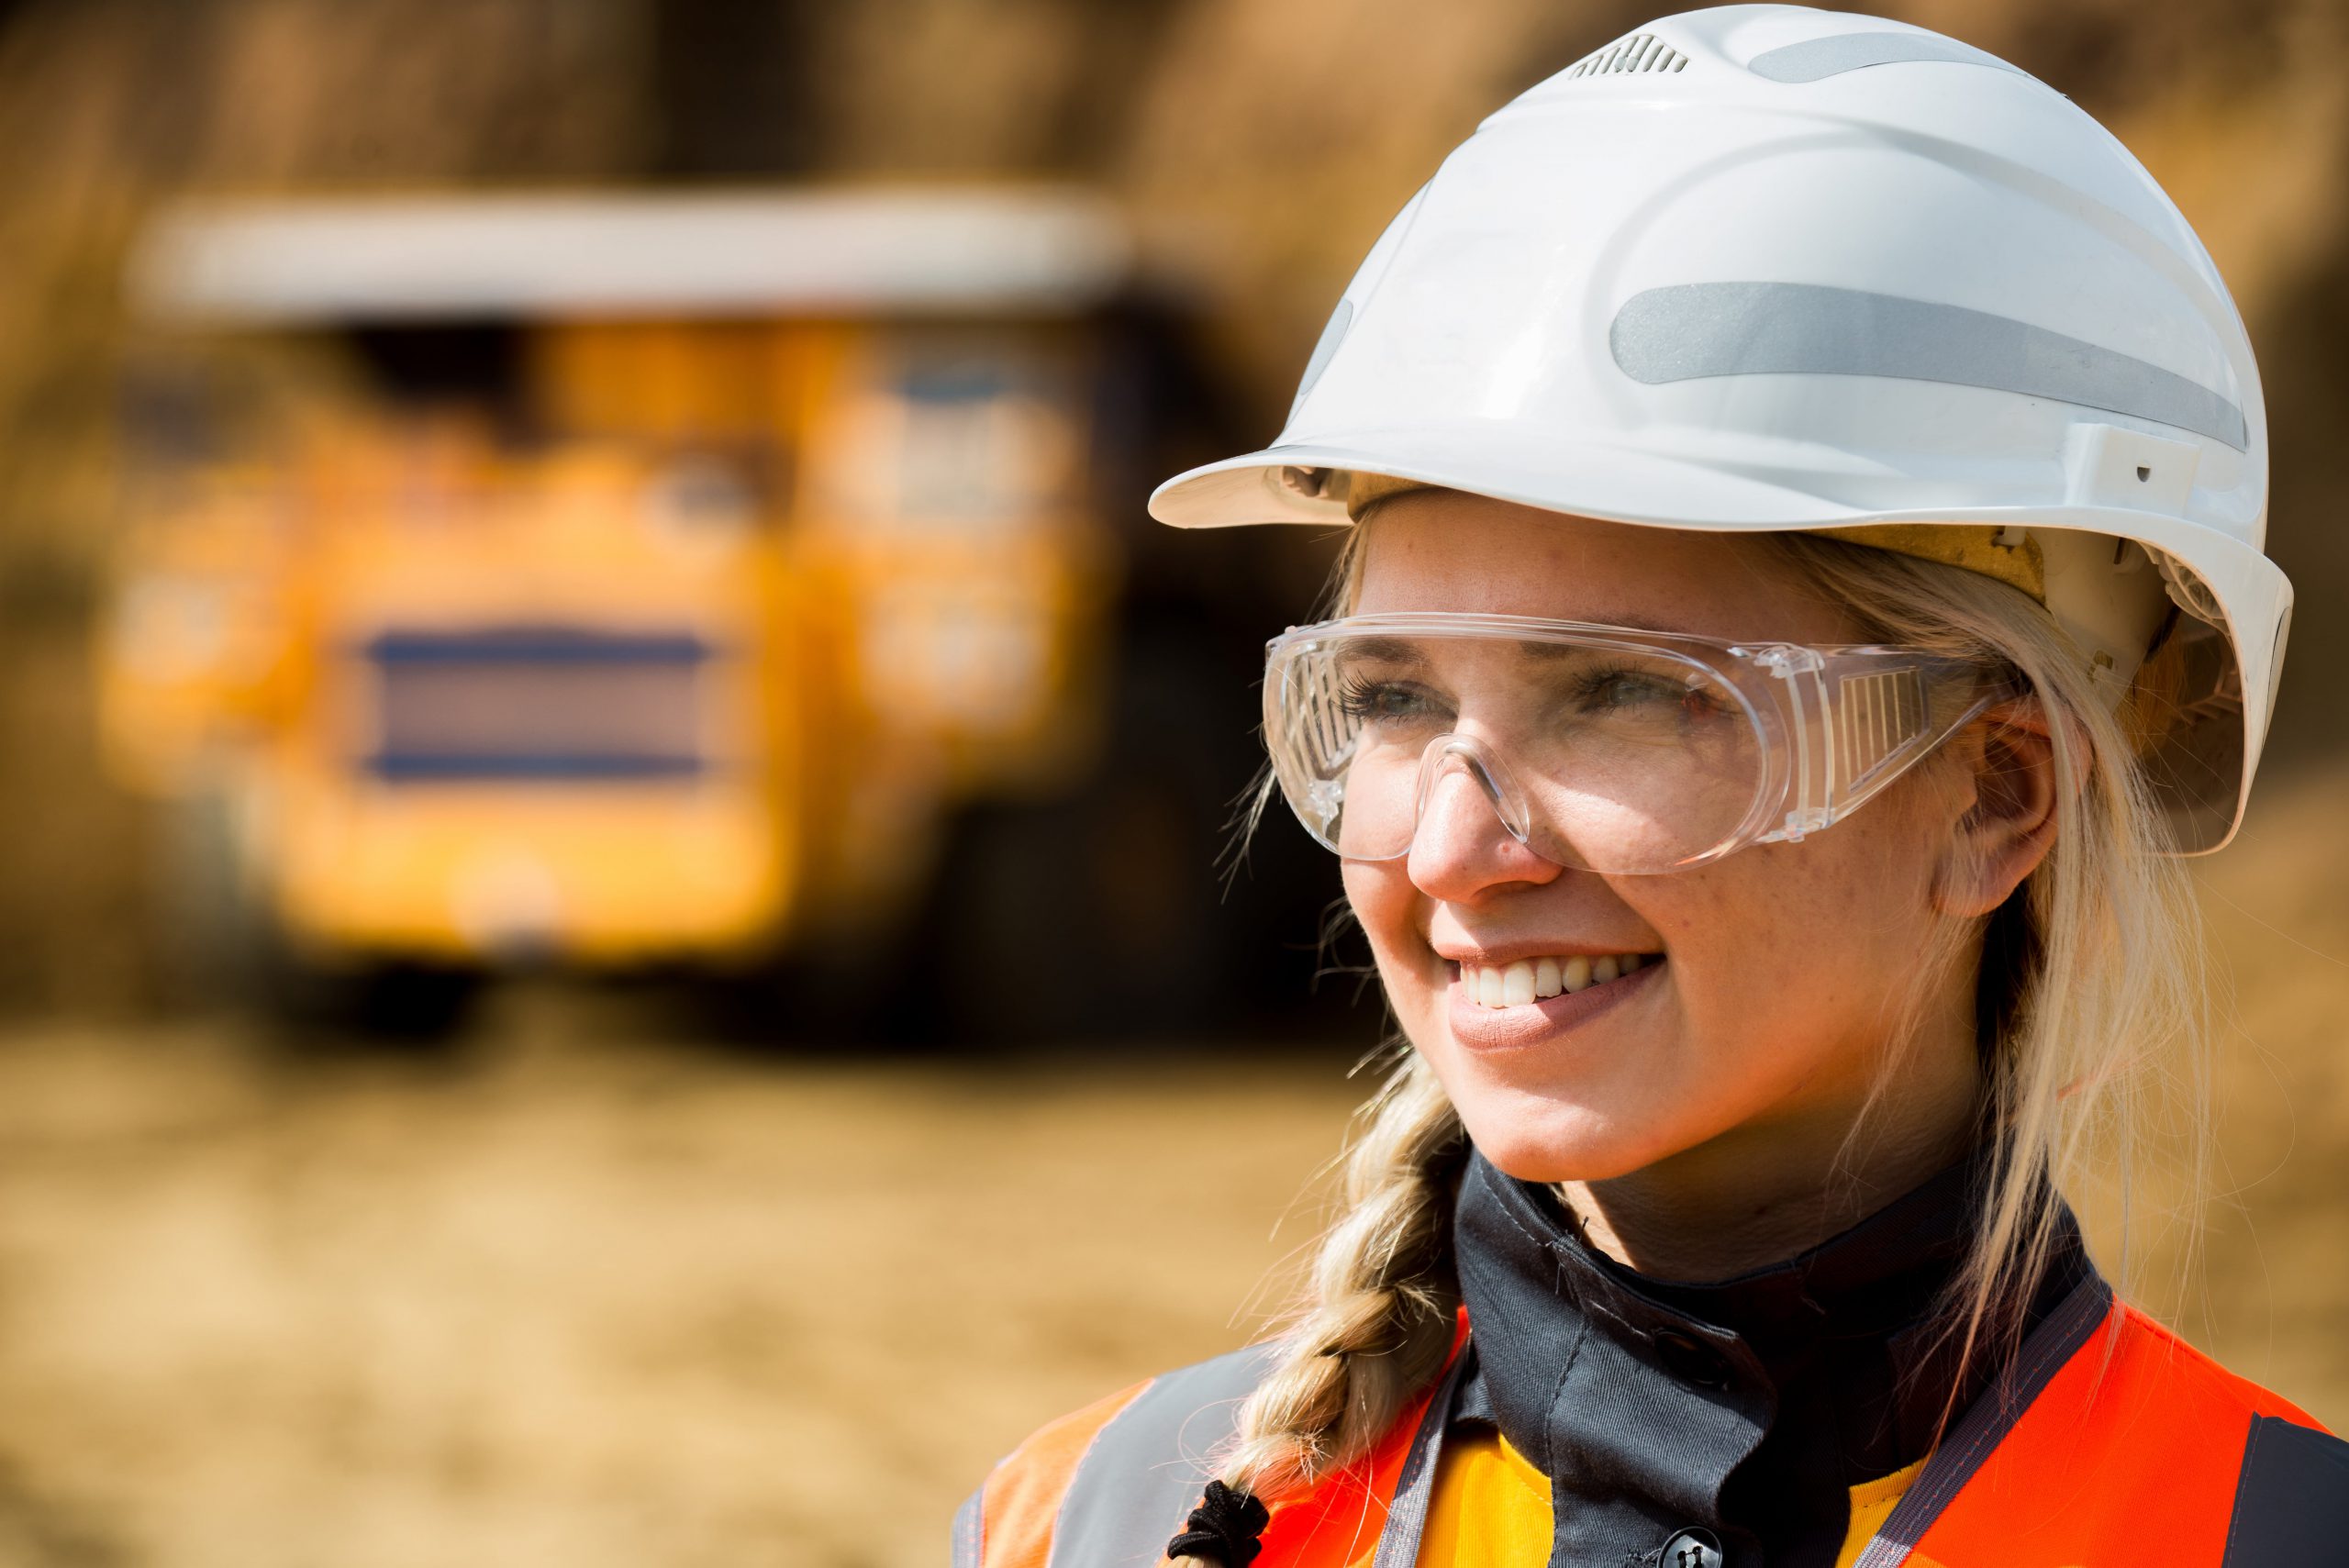 How Can Construction Companies Encourage More Women into the Industry